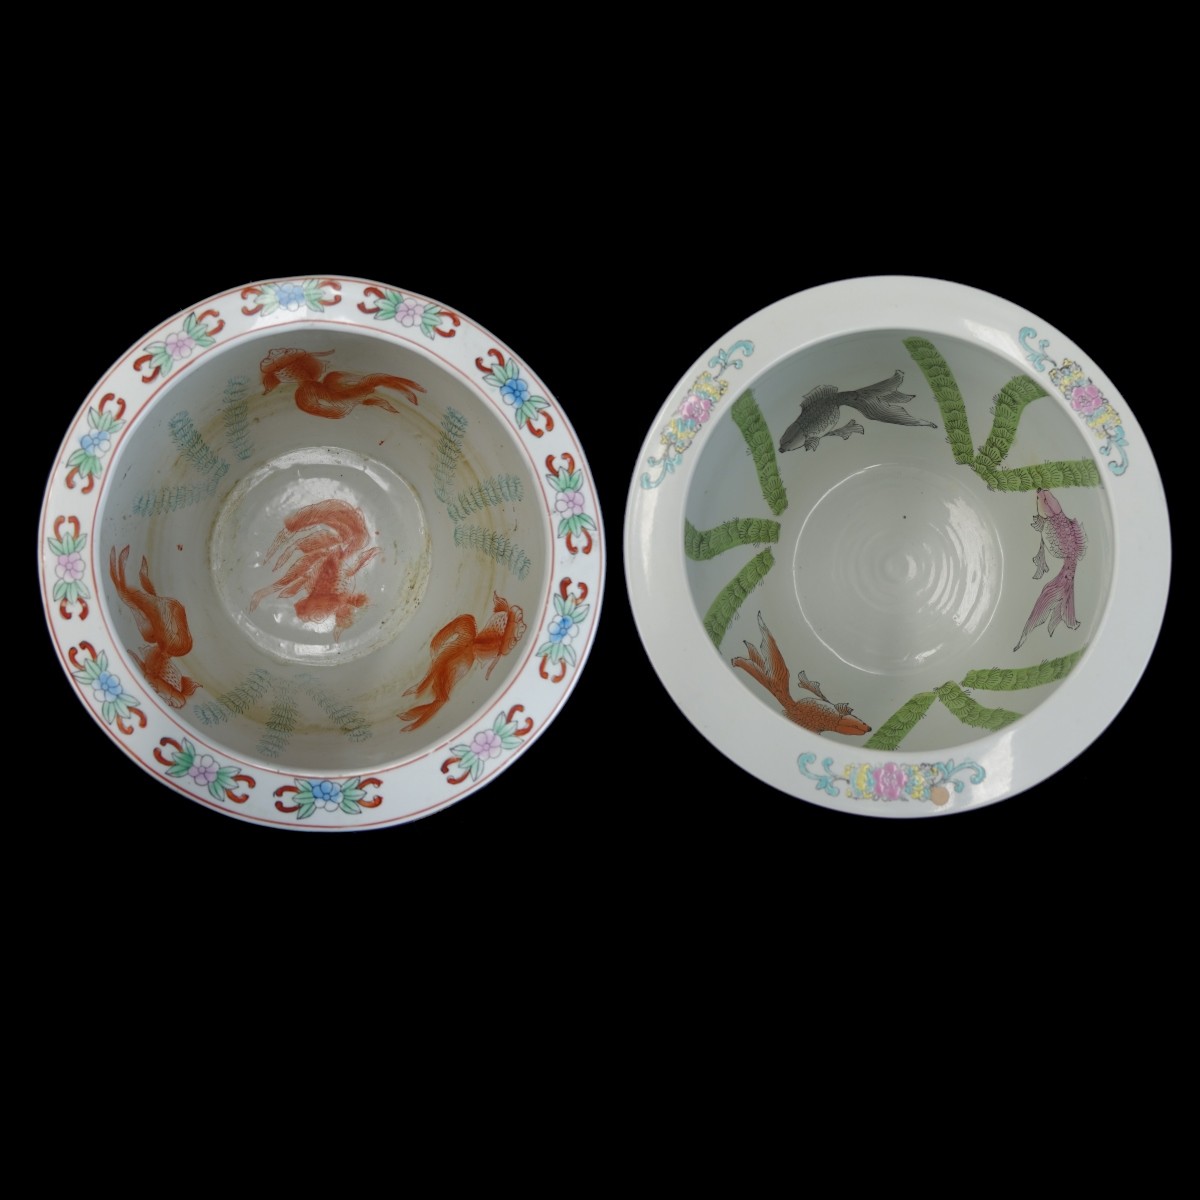 2 Porcelain Chinese Garden Planters